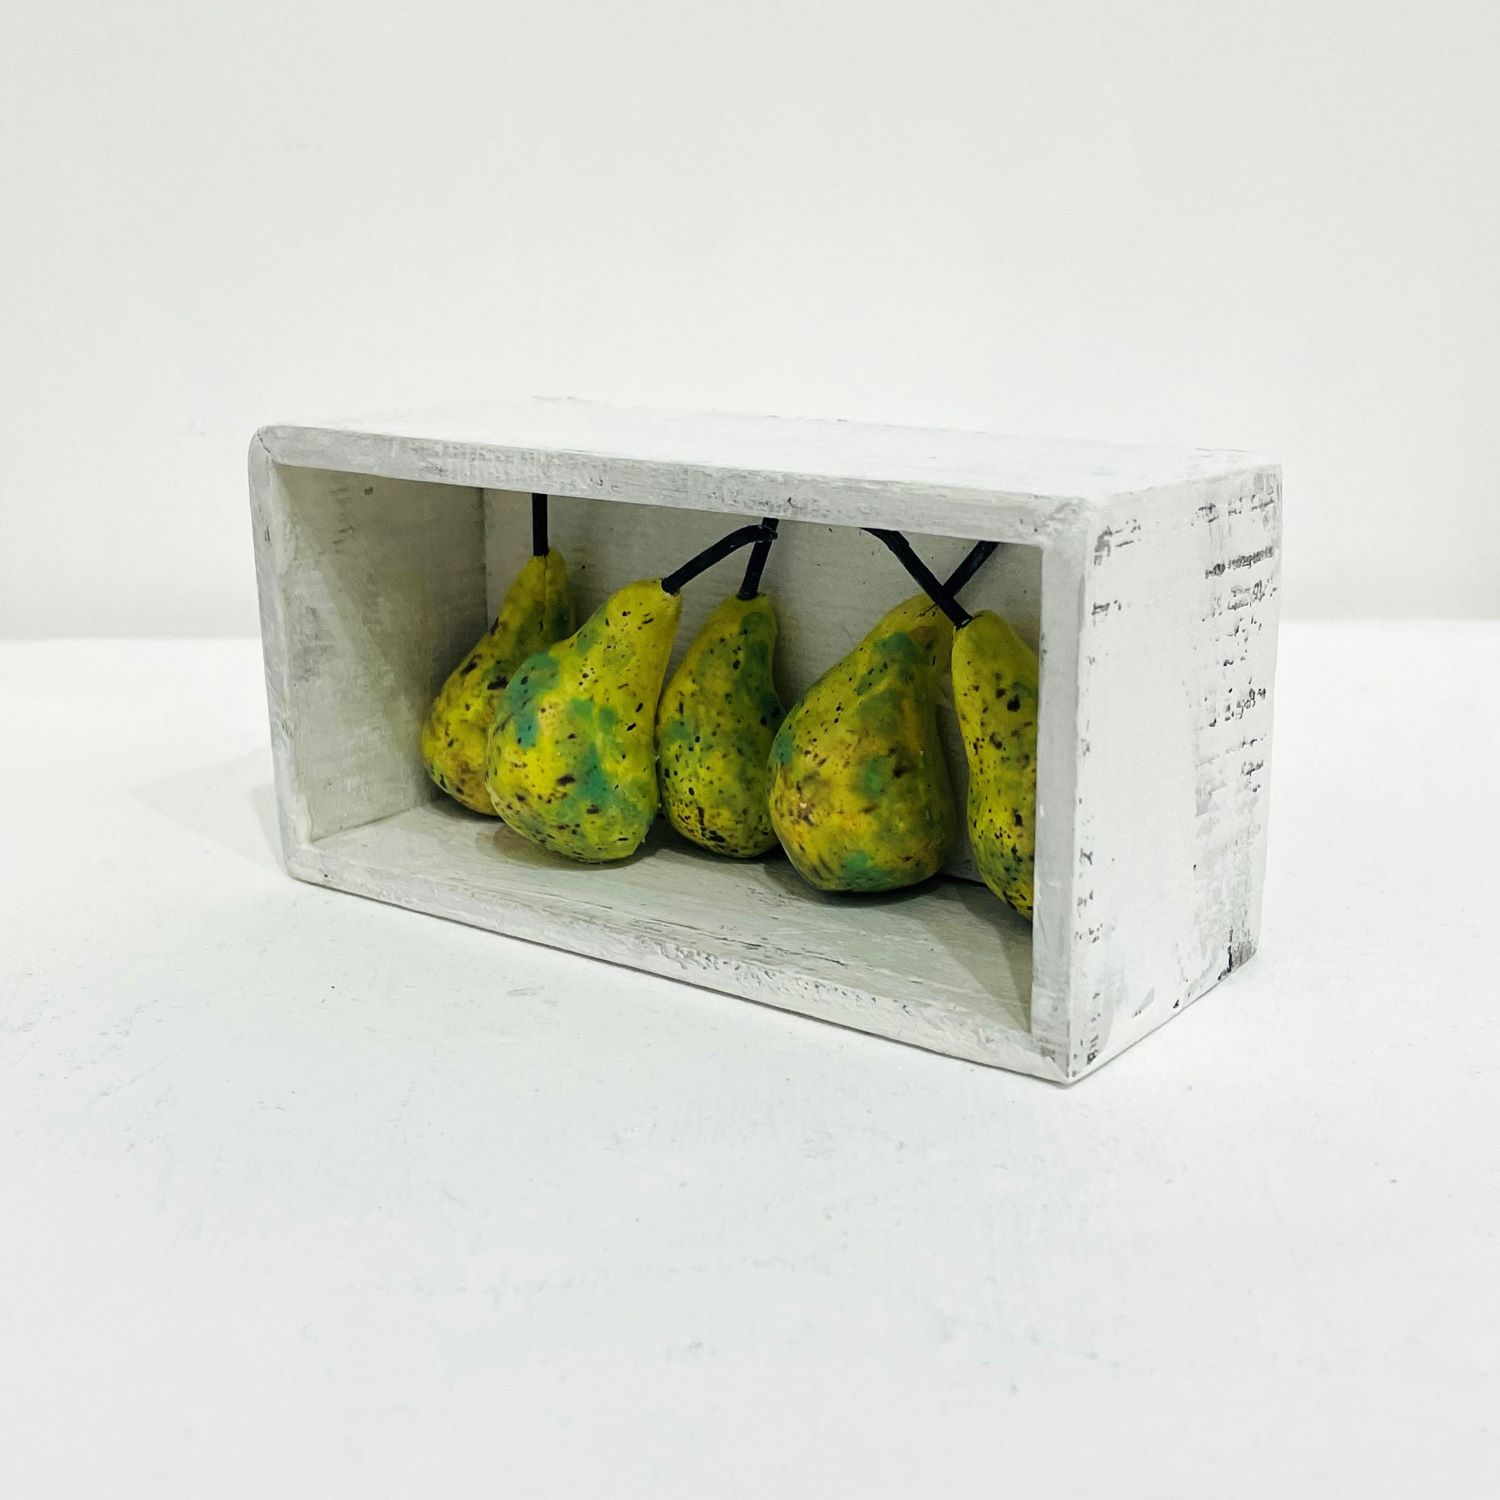 'The Miniature Pantry: Conference Pears' by artist Diana Tonnison